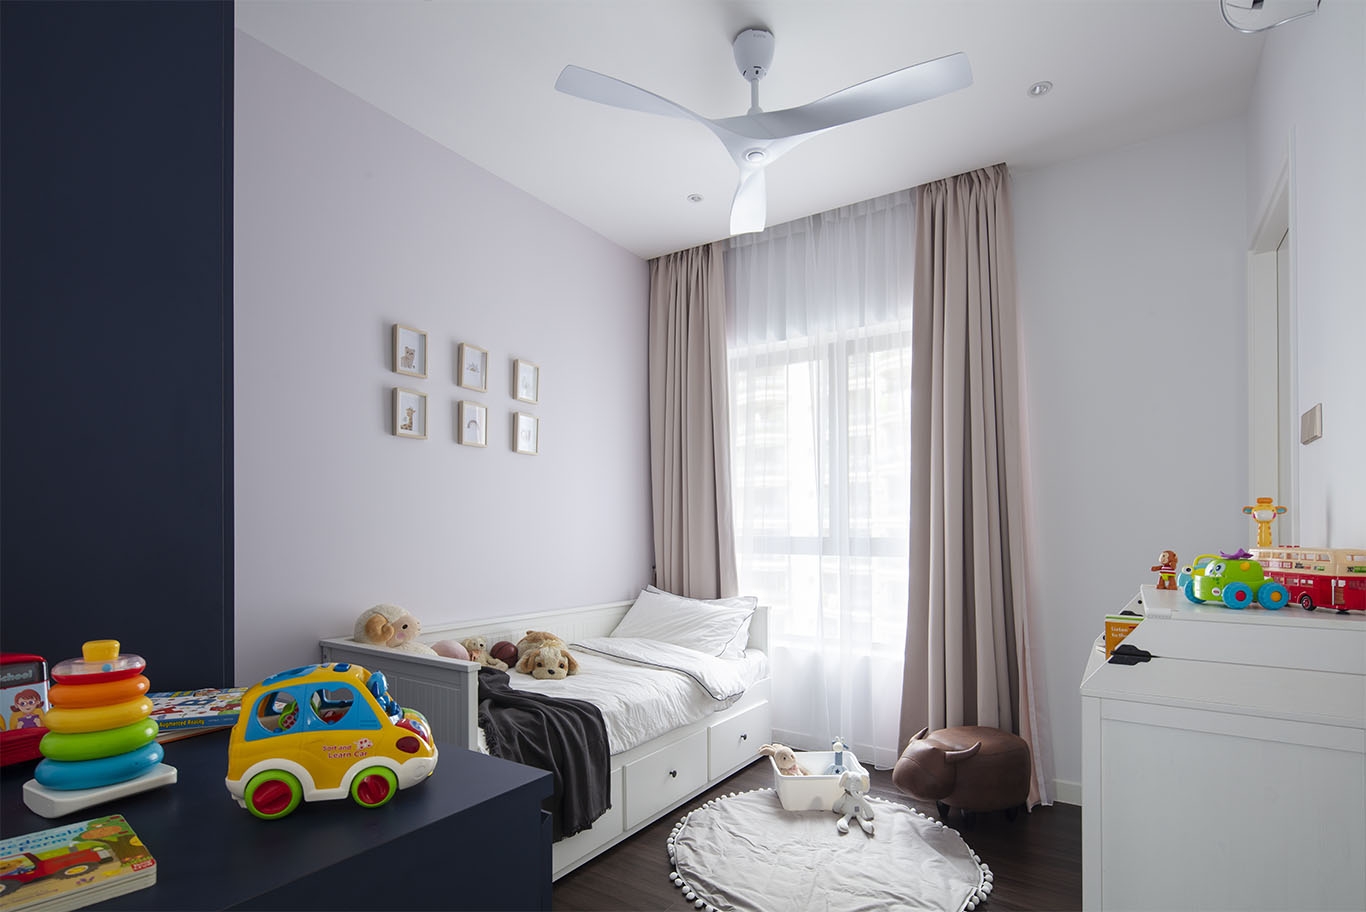 Kids bedroom with white and blue theme, single bed with built in drawer, wooden floor and cute white round carpet